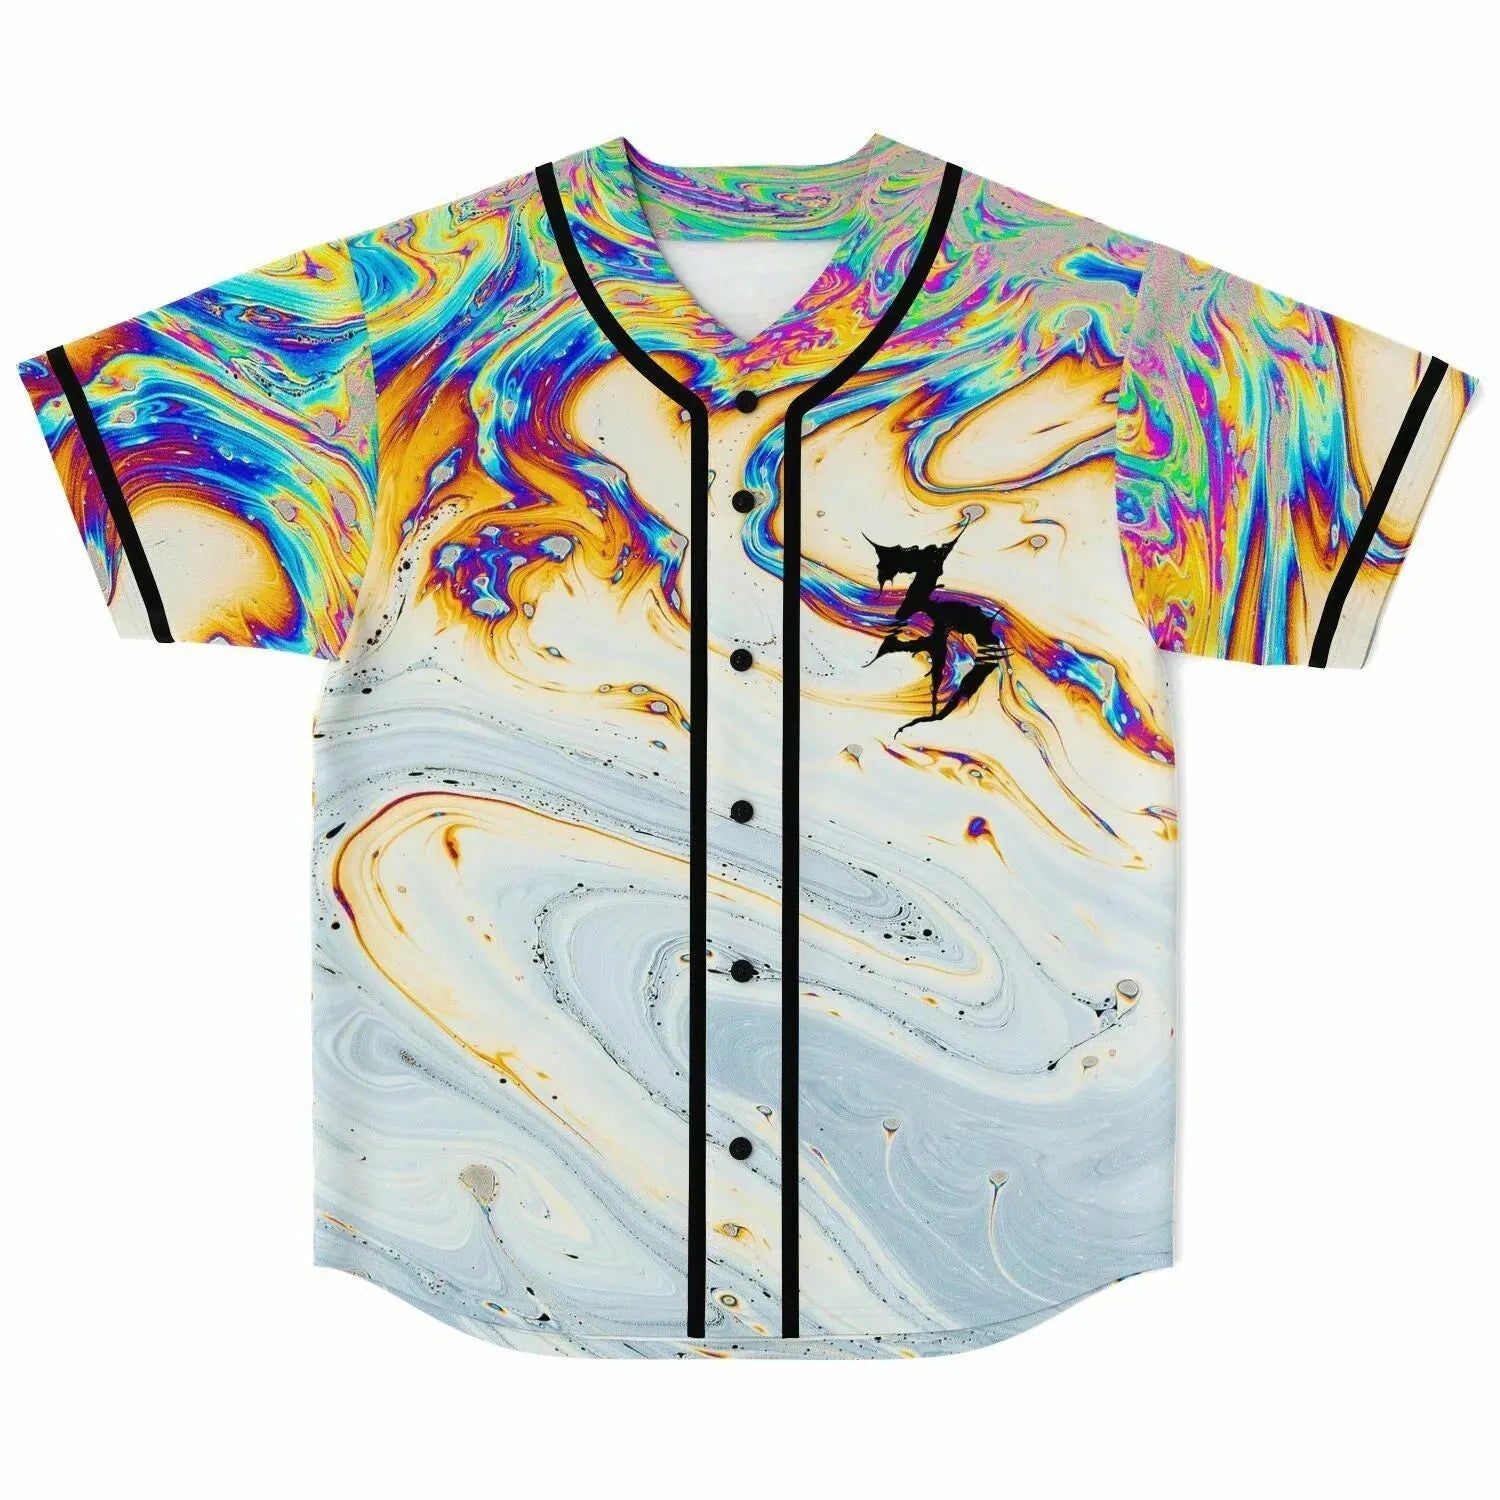 Zeds Dead Acid trip Baseball Jersey S13 - The Rave Cave